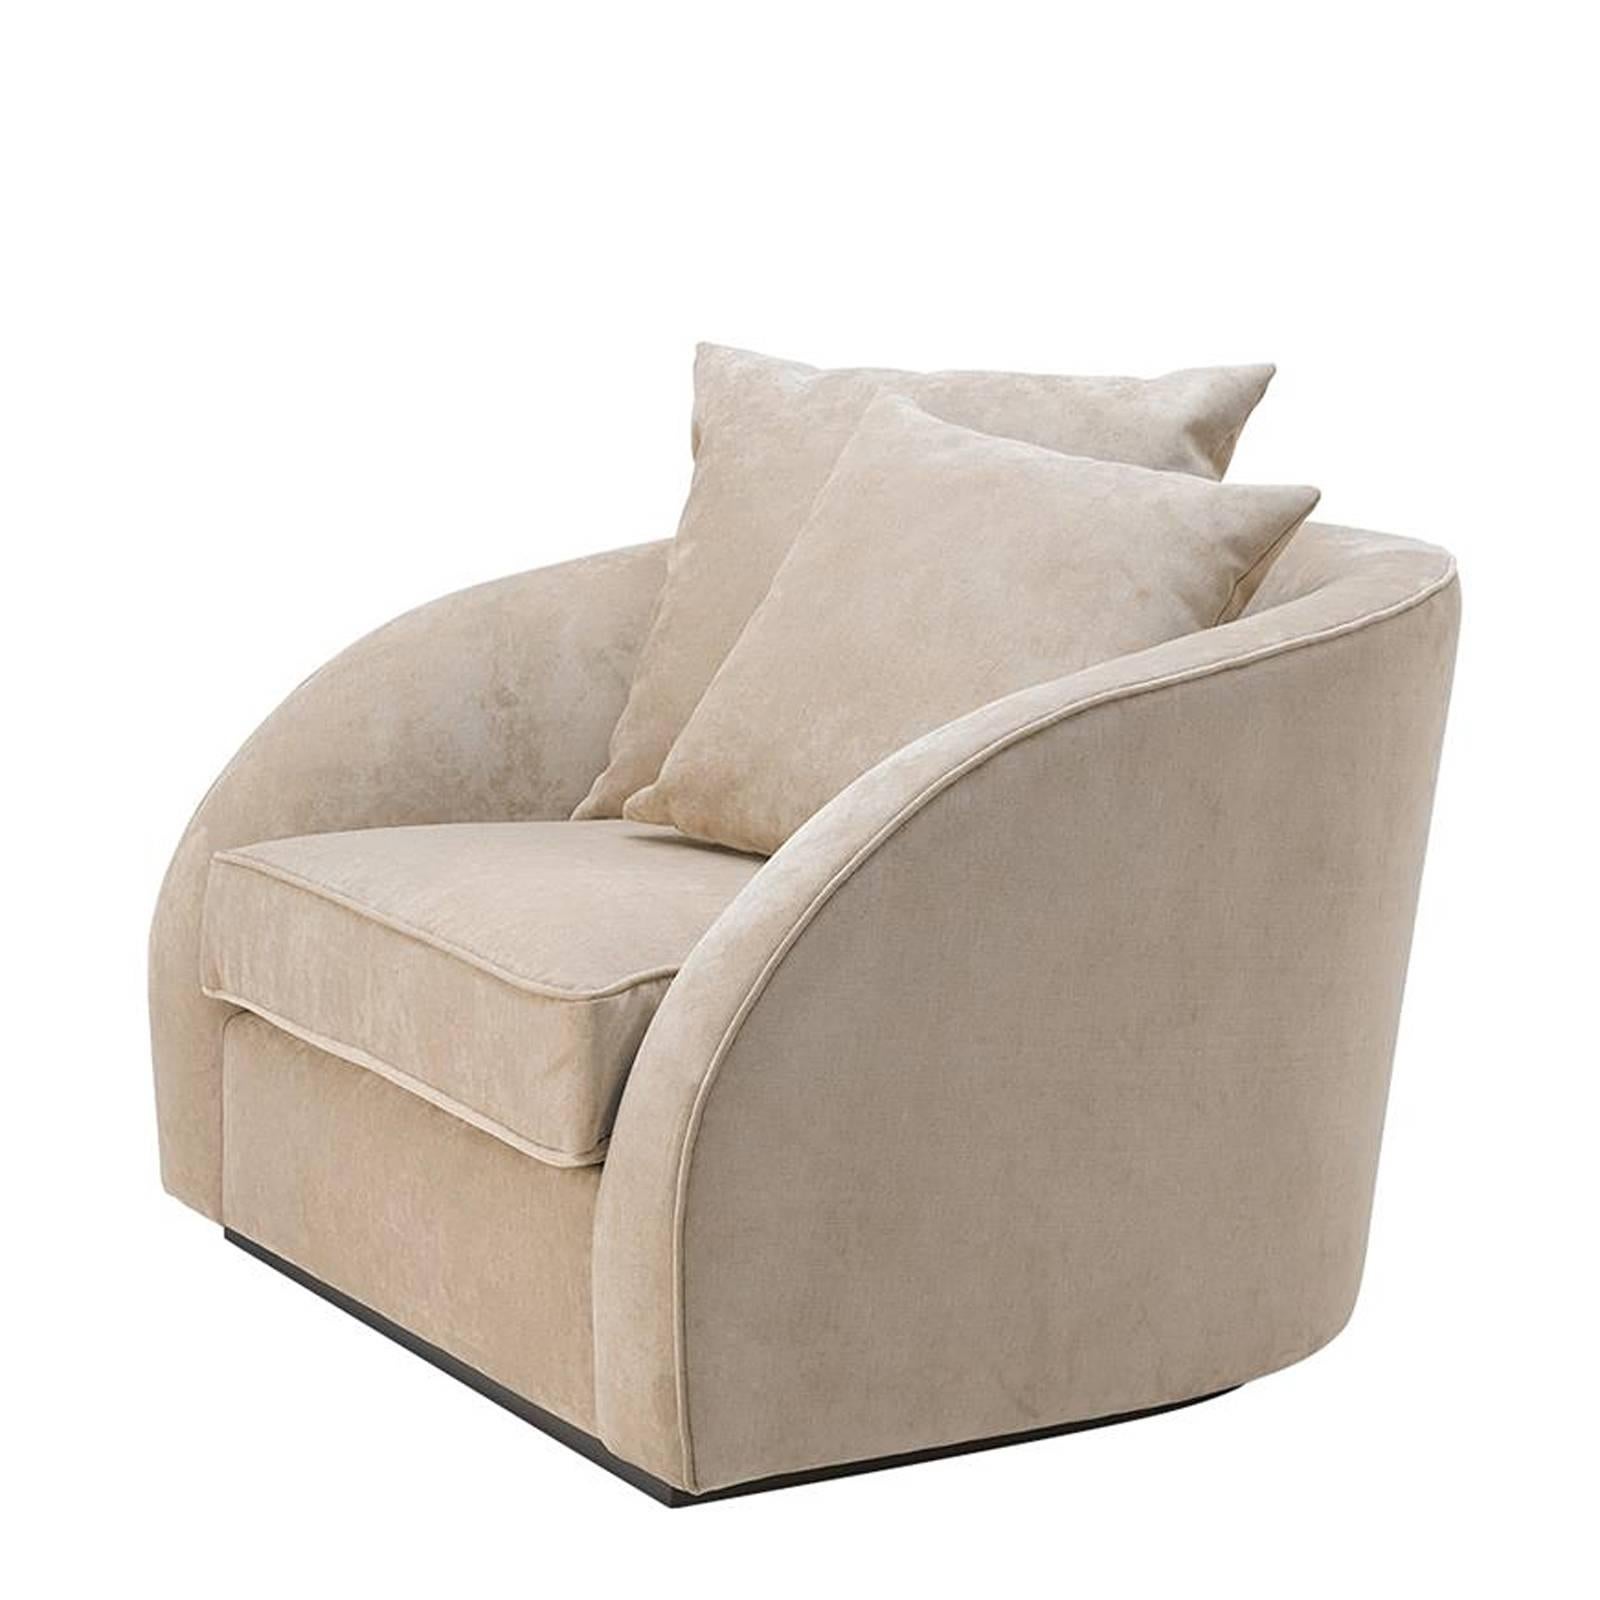 Armchair Miami lounge with structure in solid
birchwood and upholstered with greige velvet
fabric. Also available with black panama fabric
or natural panama fabric. Also available in sofa
Miami lounge.
